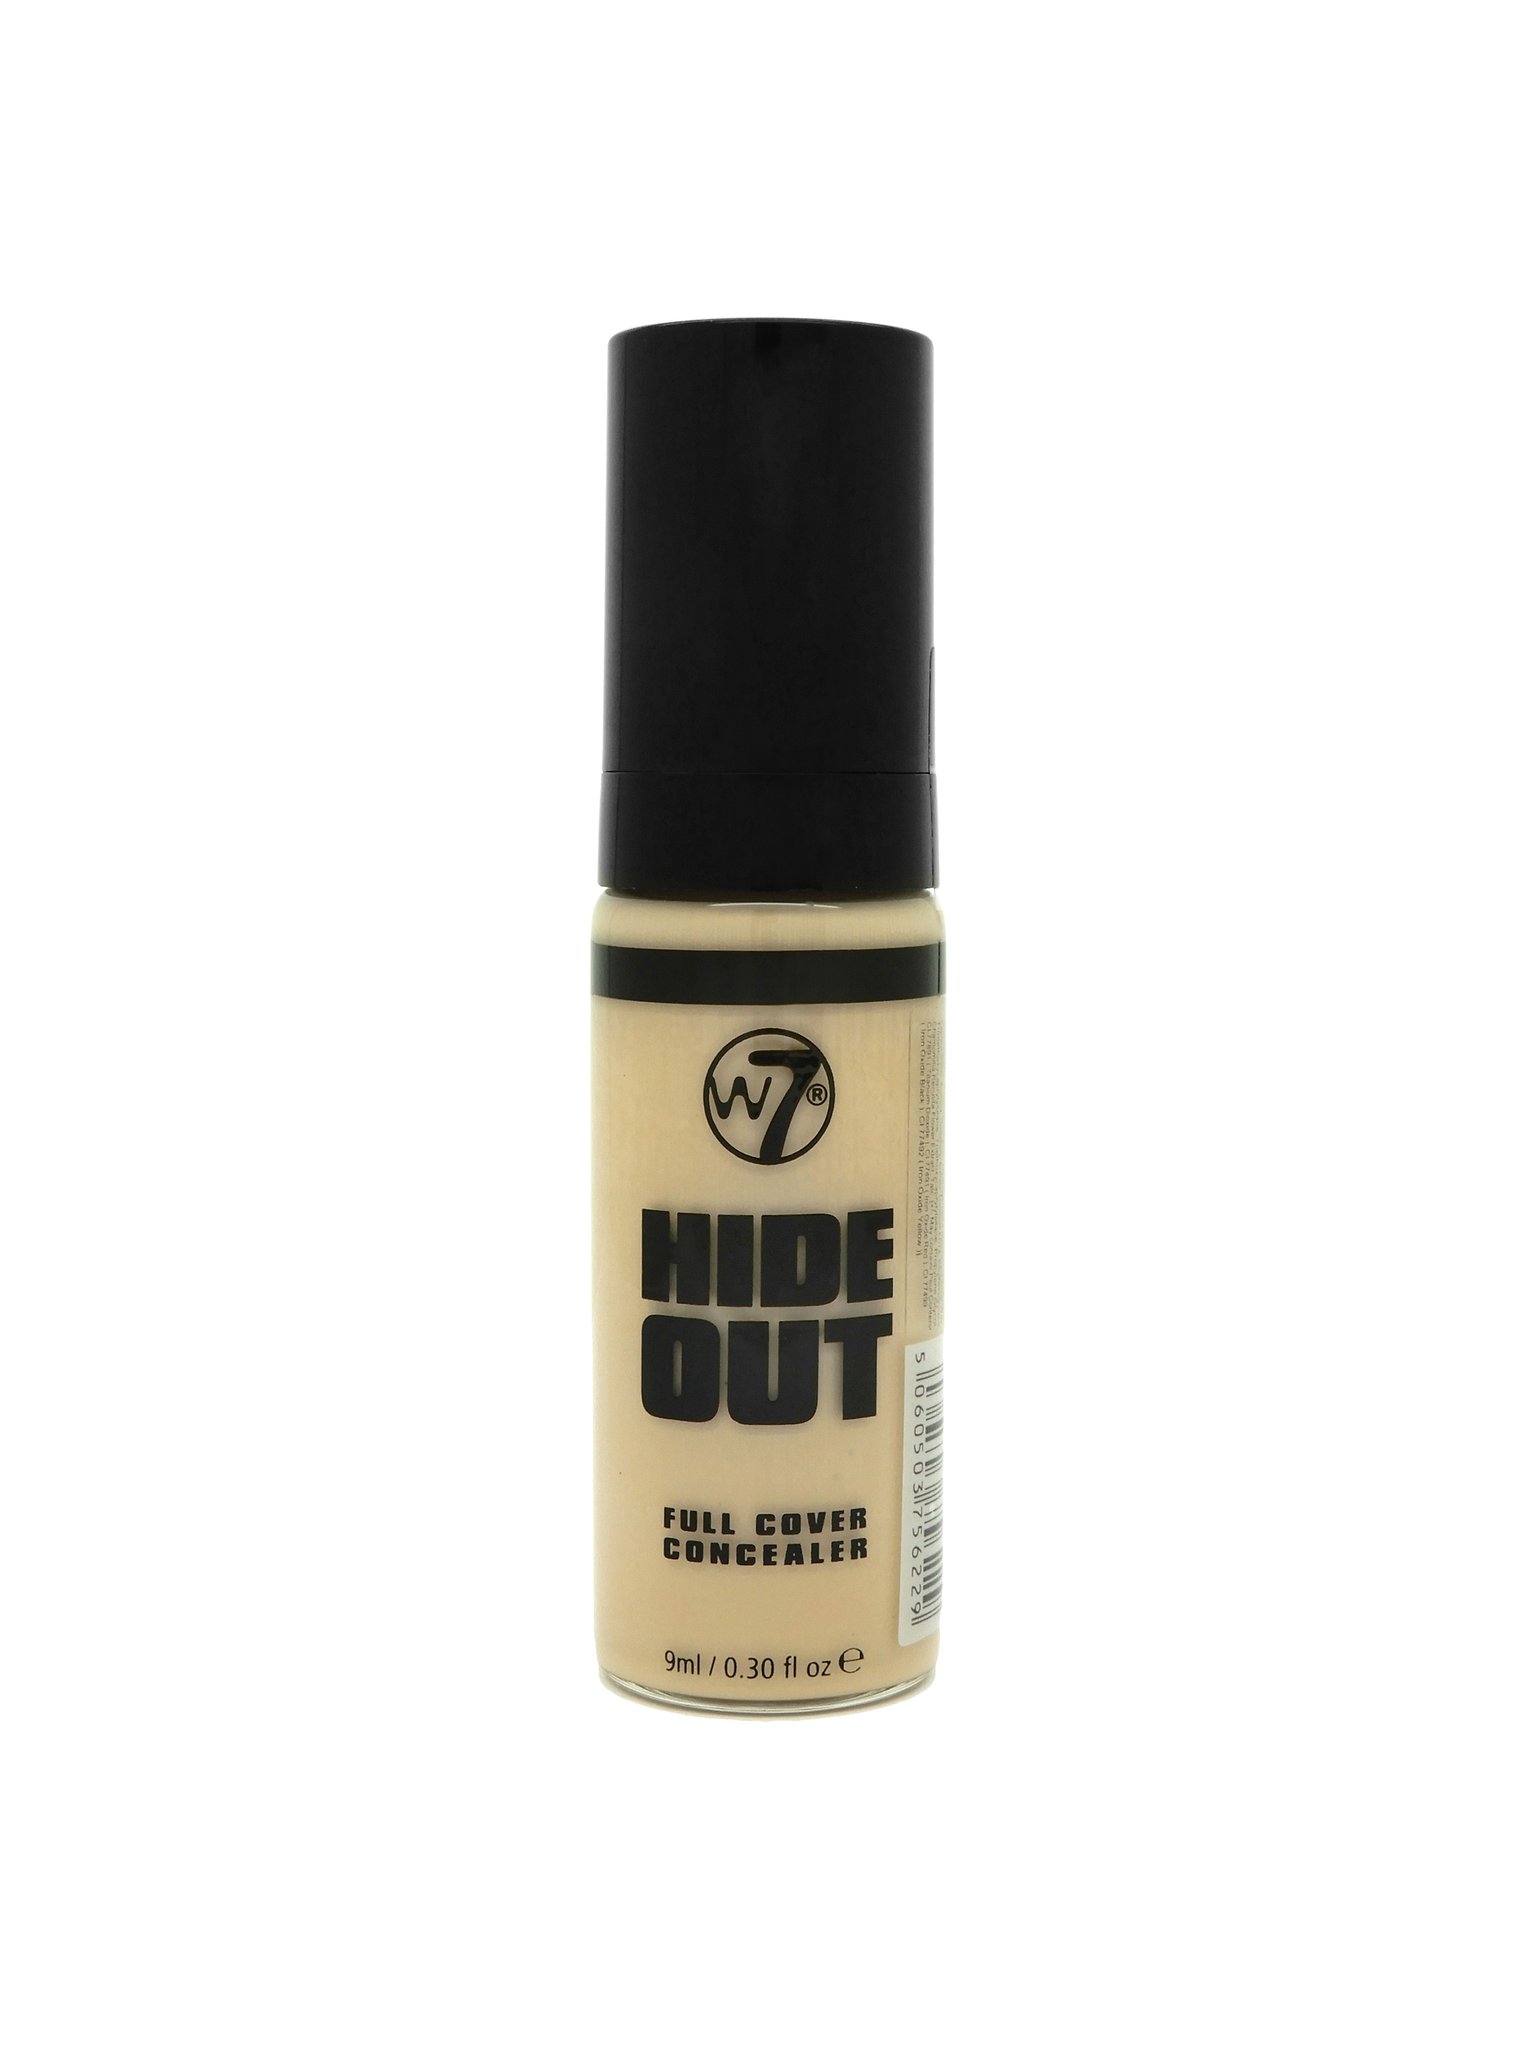 W7 Hide out full cover concealer medium [CLONE]